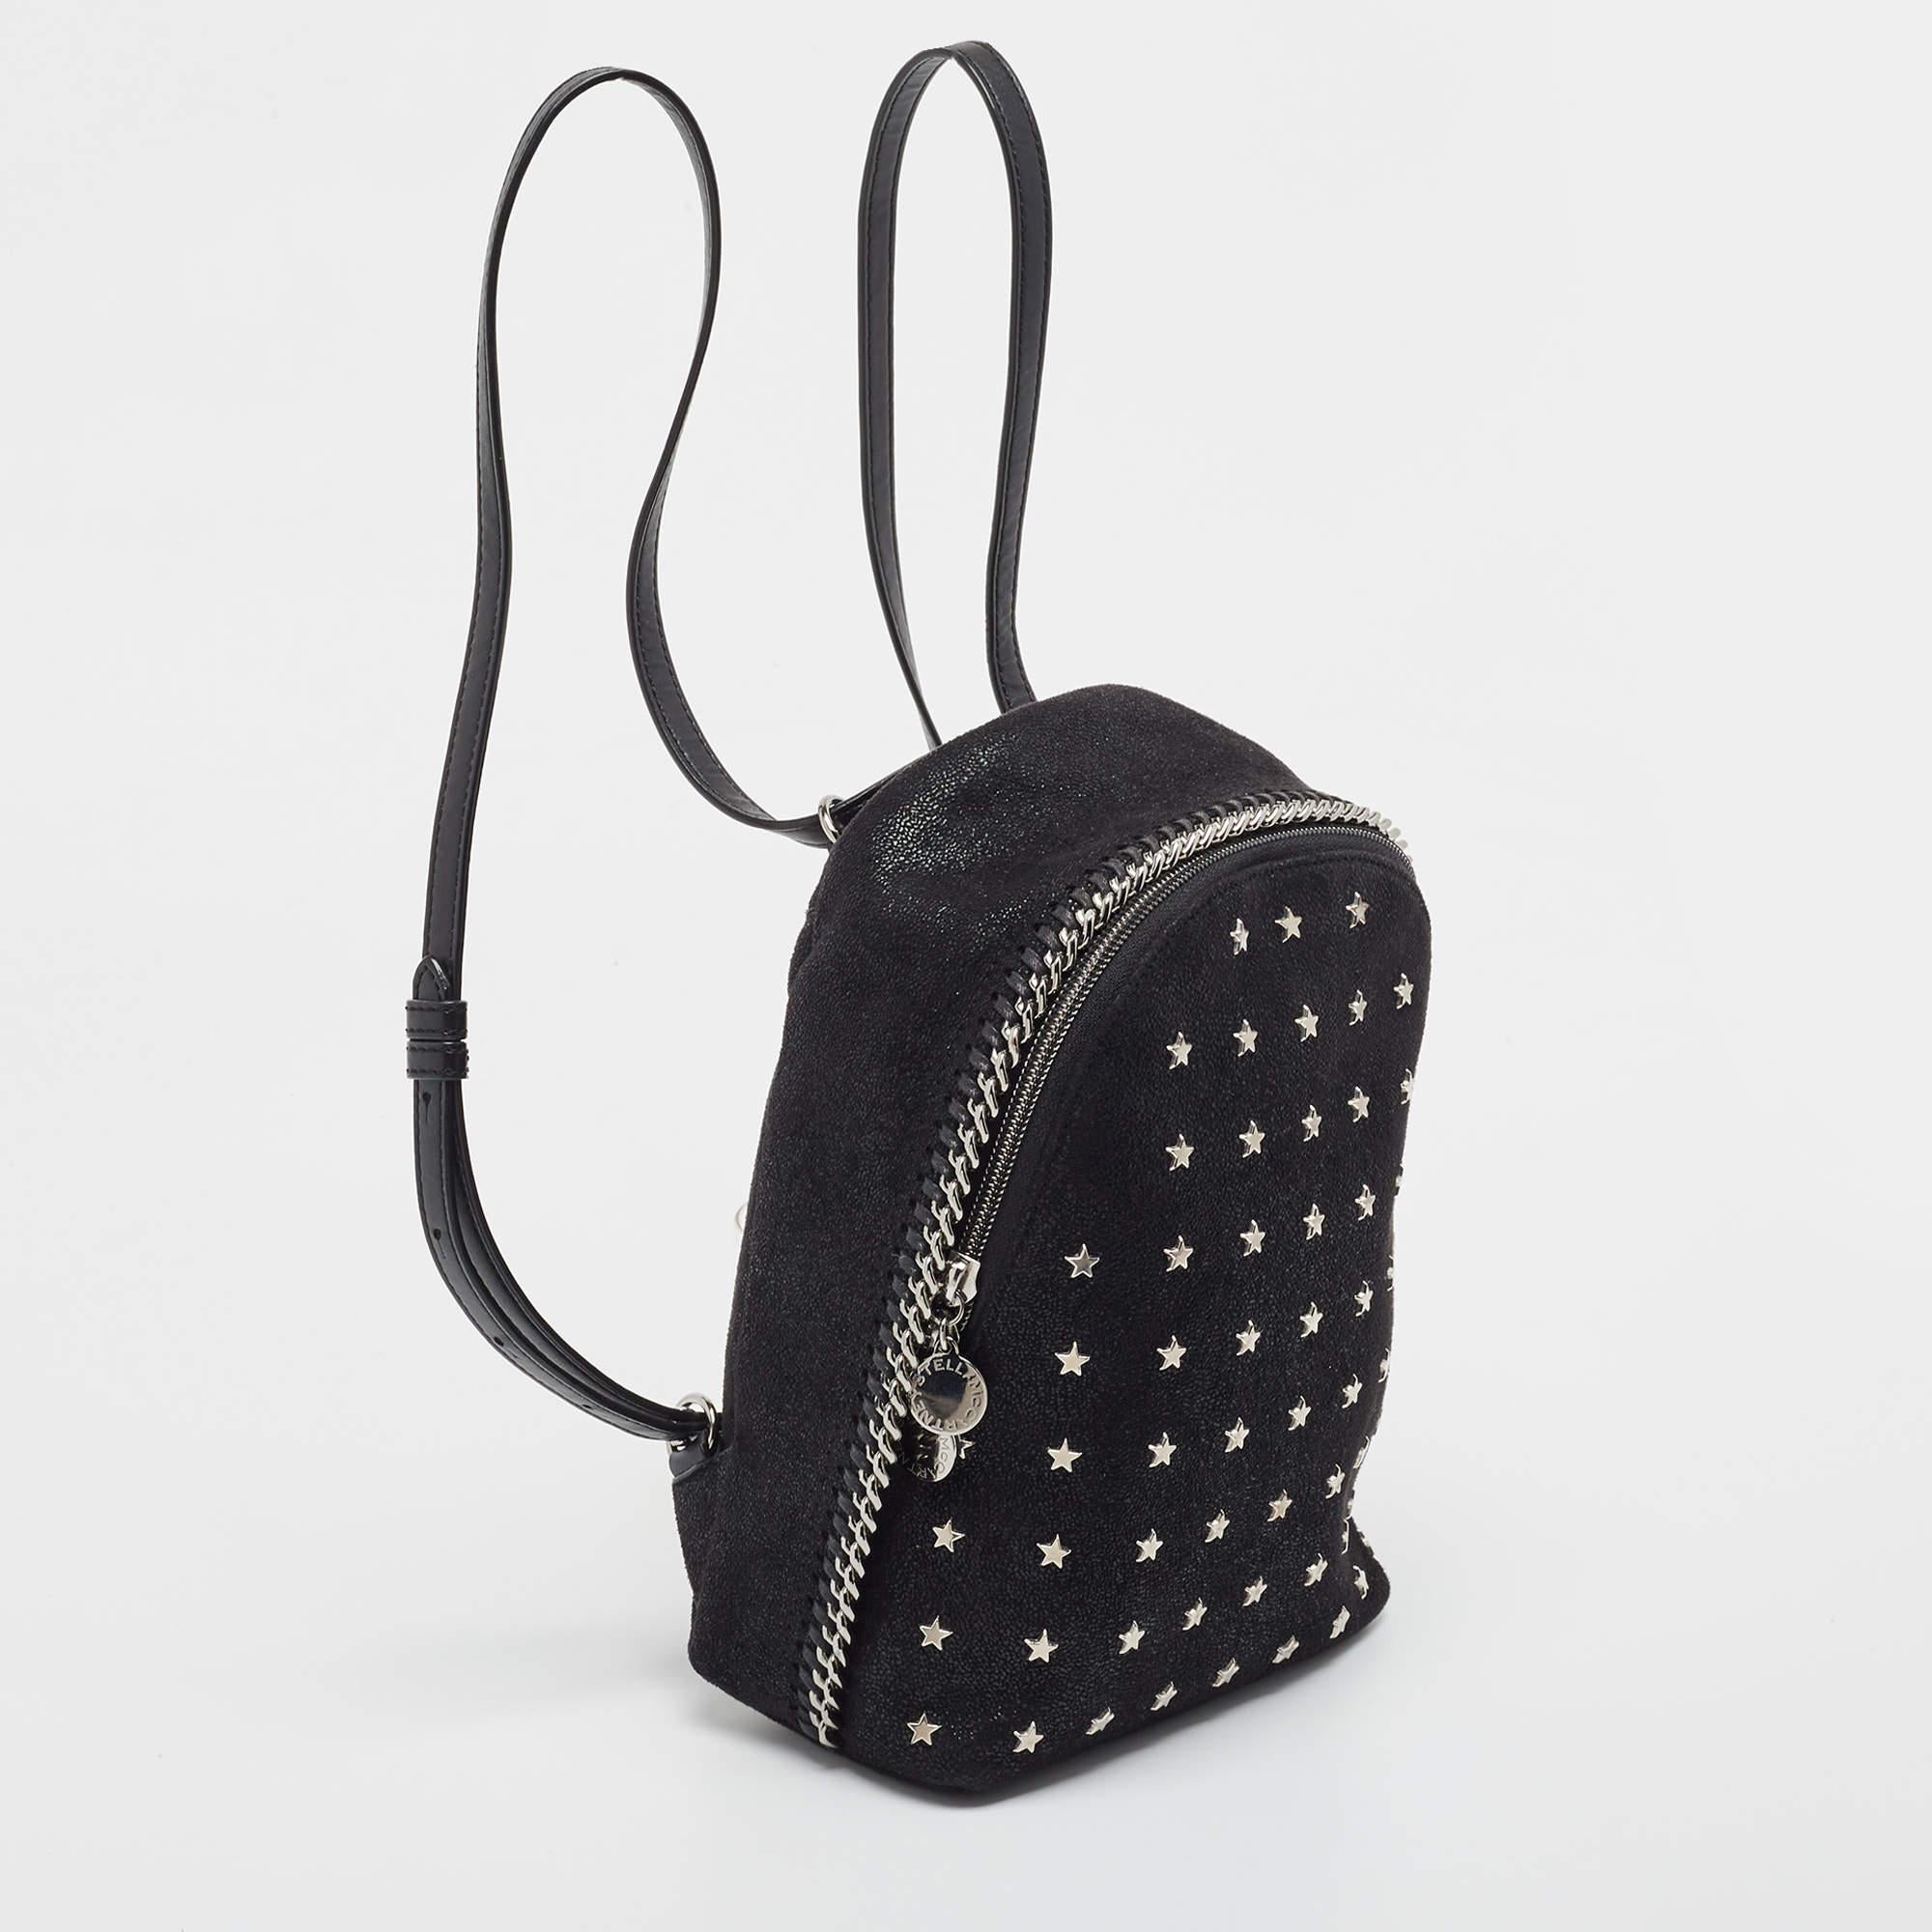 To accompany all your casual outings in the most fashionable way, Stella McCartney brings you this Falabella backpack that boasts fabulous style and details. It flaunts a black exterior with a front zip pocket and star & signature chain details.

